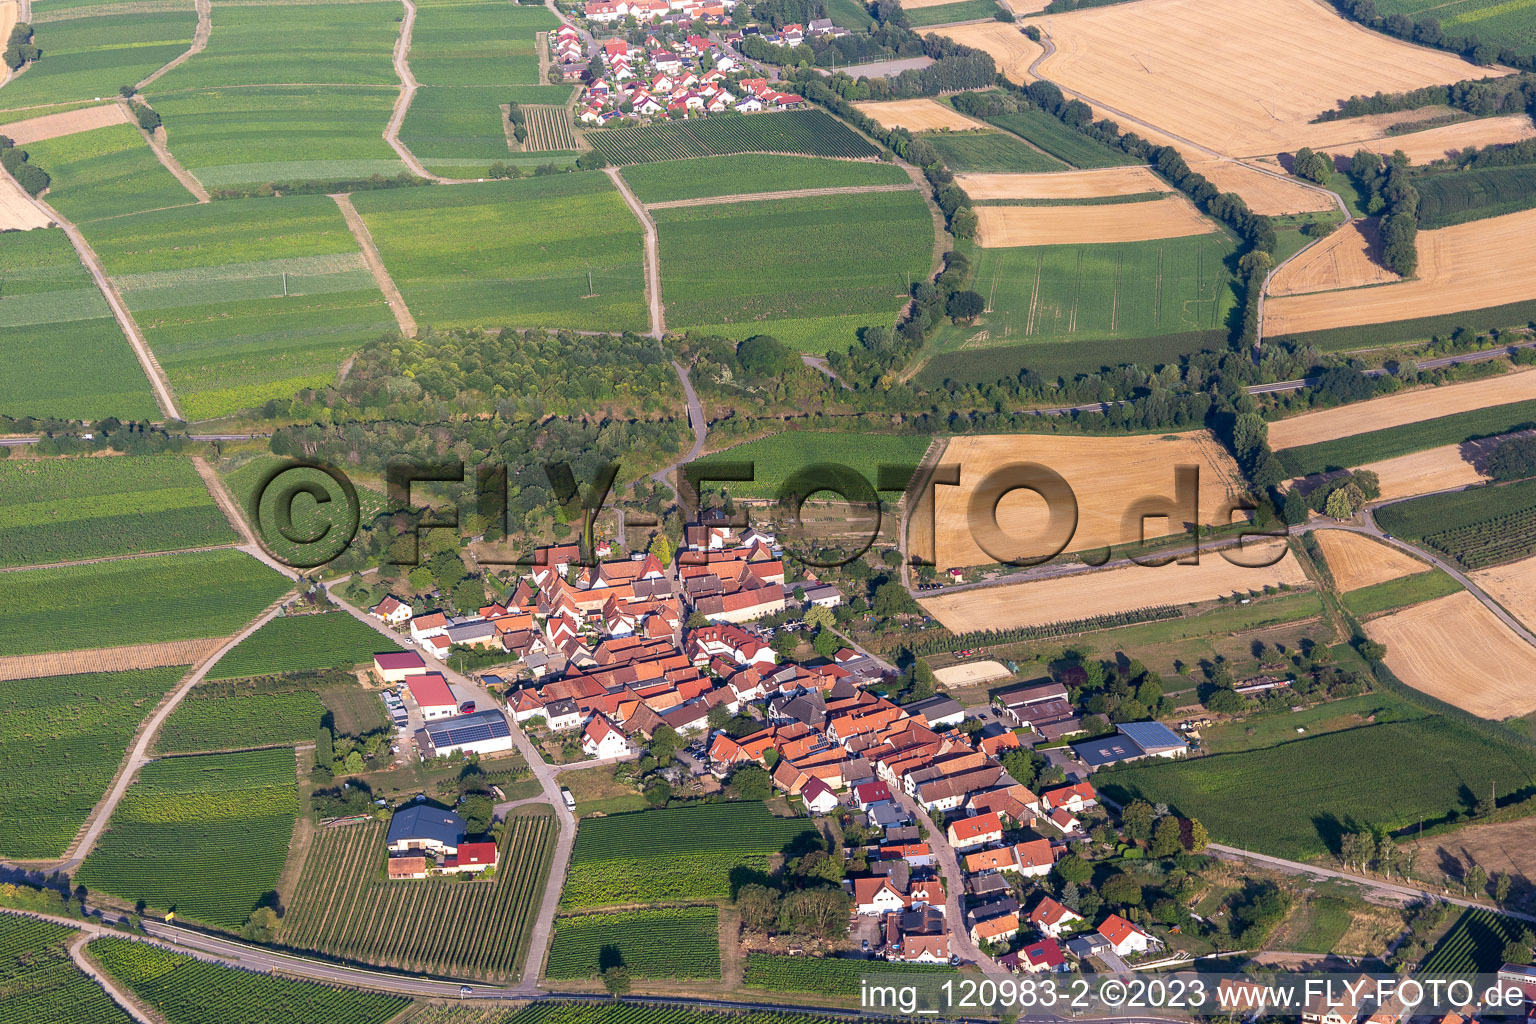 District Oberhofen in Pleisweiler-Oberhofen in the state Rhineland-Palatinate, Germany from above